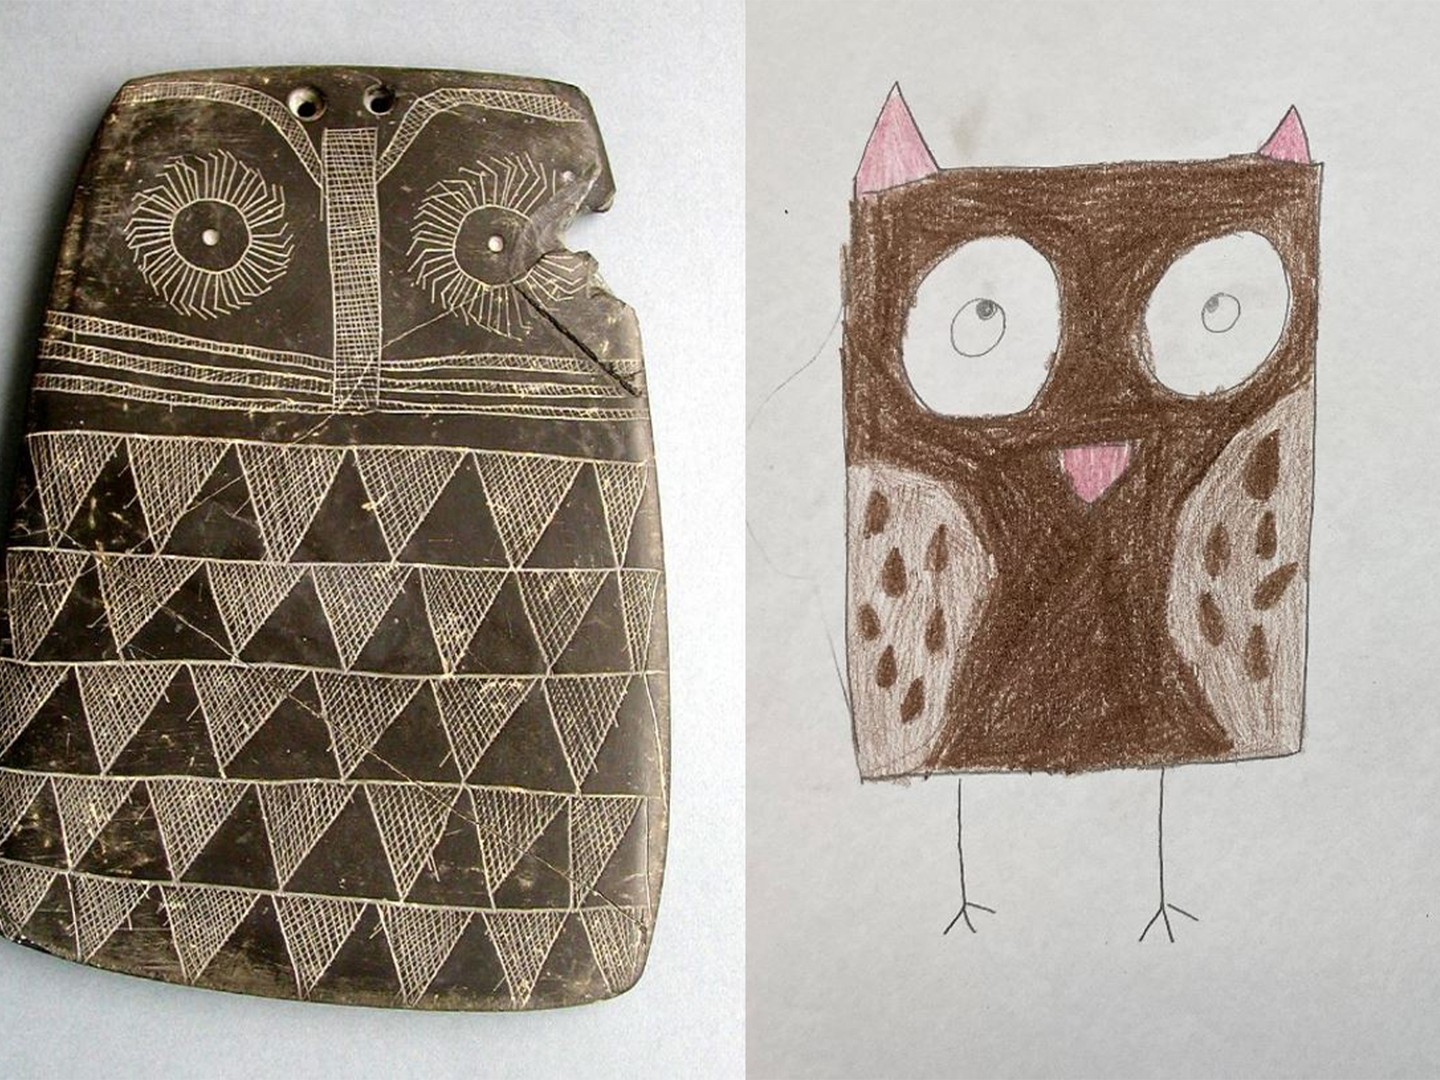 A carving called "Placa de Valencina" from the Archaeological Museum of Seville compared with a drawing made by a 6-year-old.